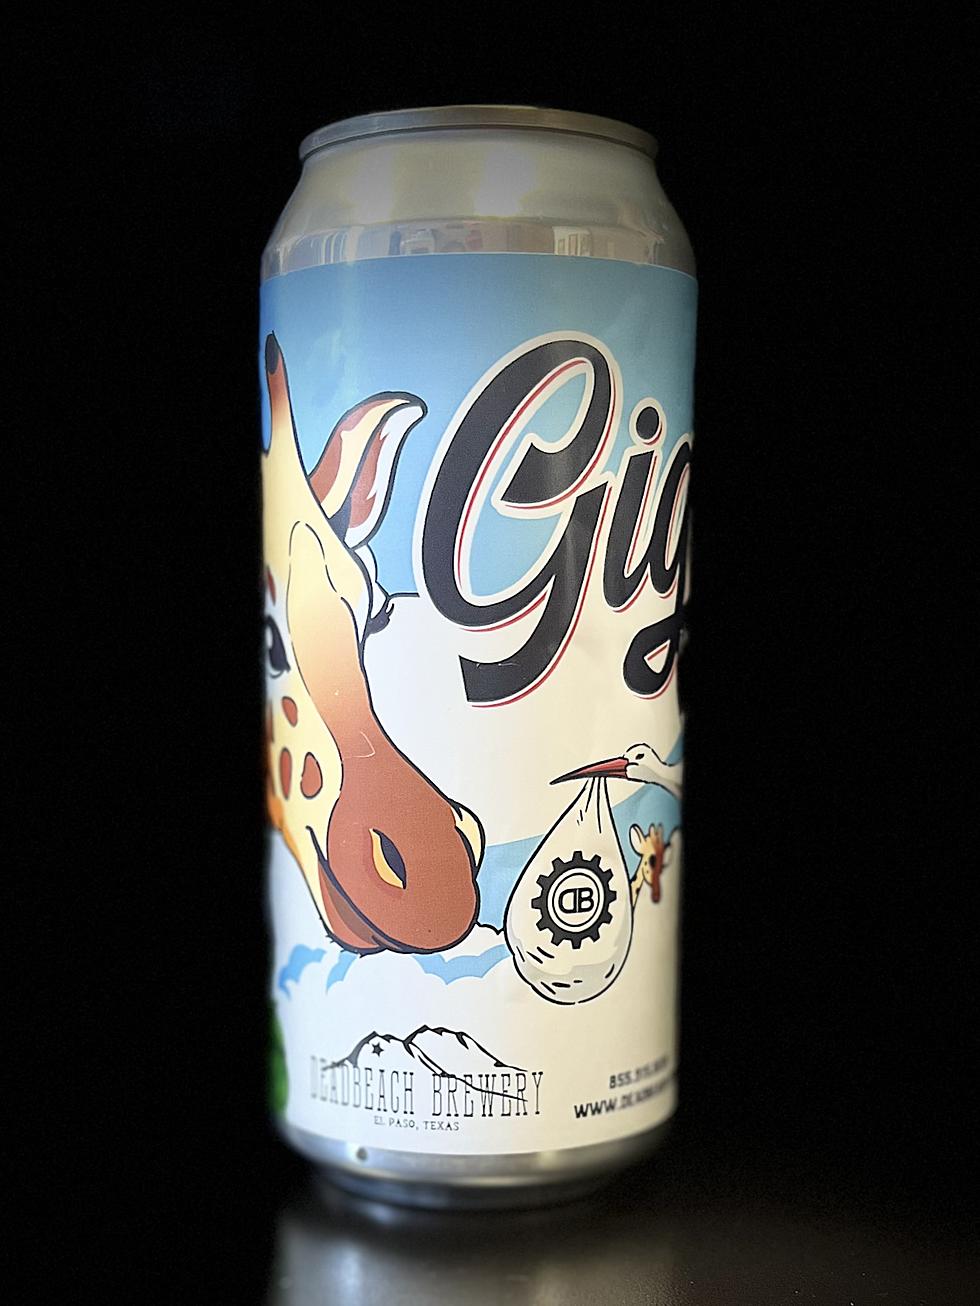 Pour a Tall Glass of Gigi’s Baby Shower Beer From DeadBeach